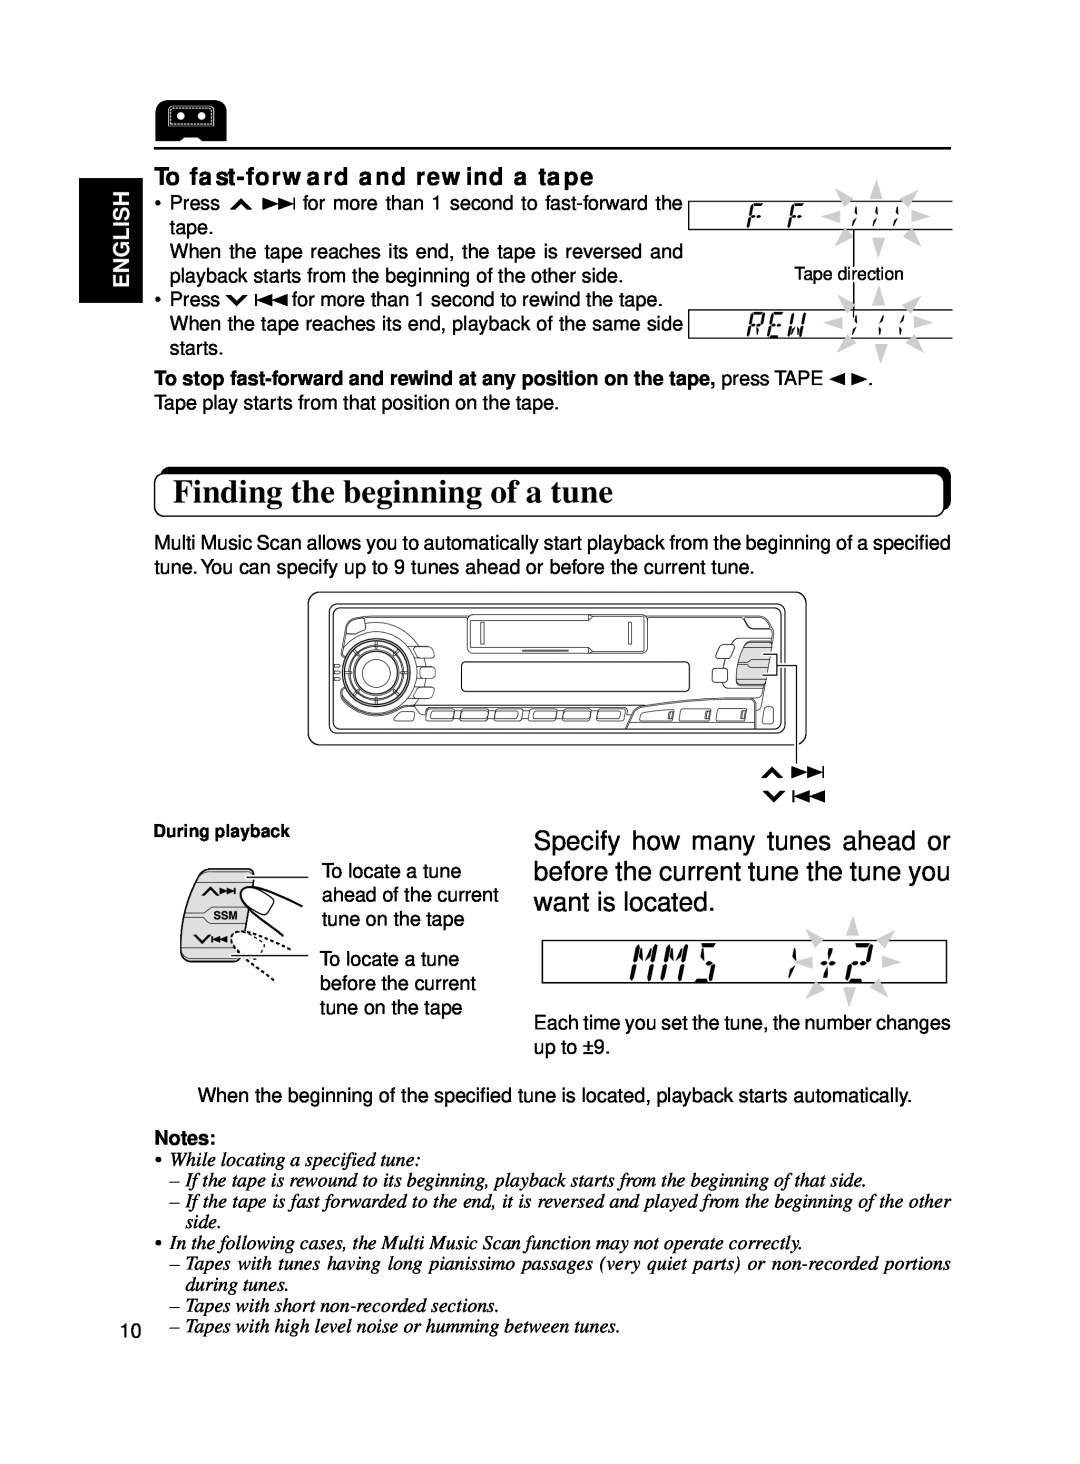 JVC KS-FX250 manual Finding the beginning of a tune, To fast-forwardand rewind a tape, English 